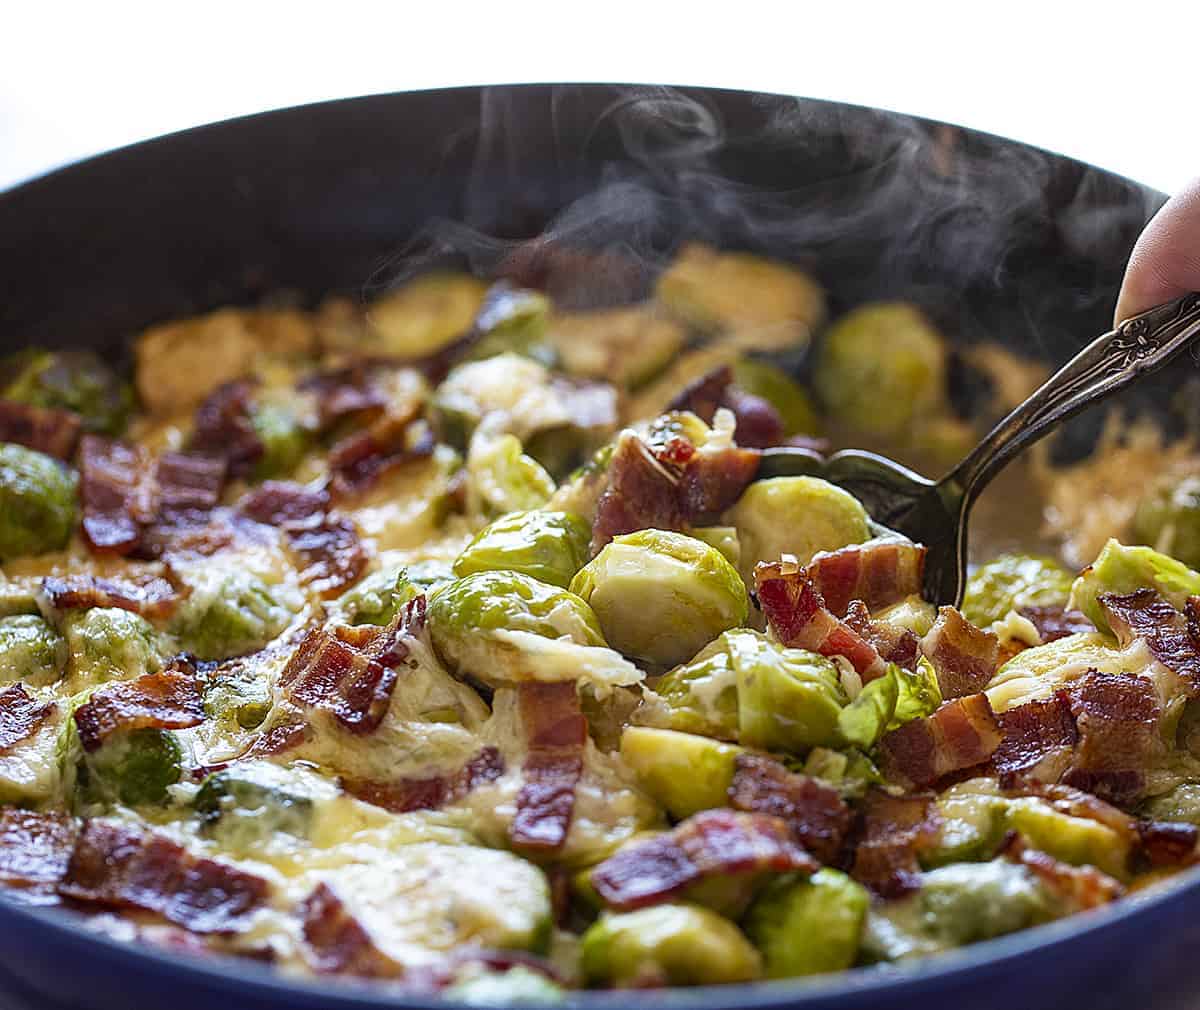 Creamy Cheesy Brussel Sprouts with Gruyere and Mozarella Cheese on a Spoon Being Lifted from Skillet with Steam